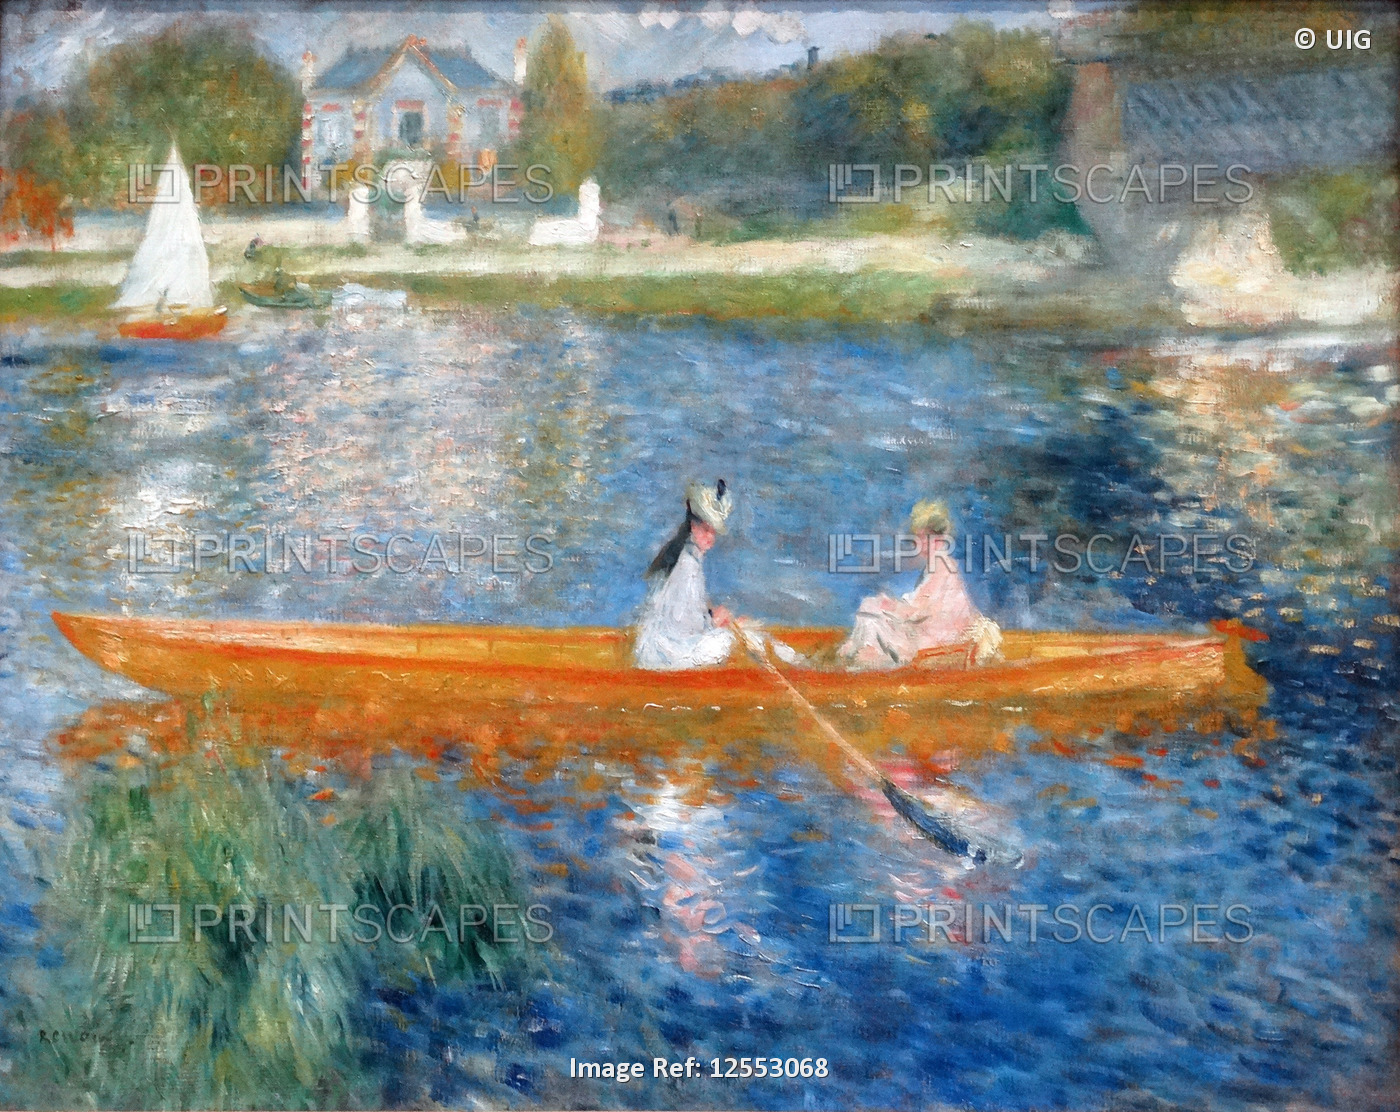 Painting titled 'The Skiff (La Yole)' by Pierre-Auguste Renoir, dated 1875